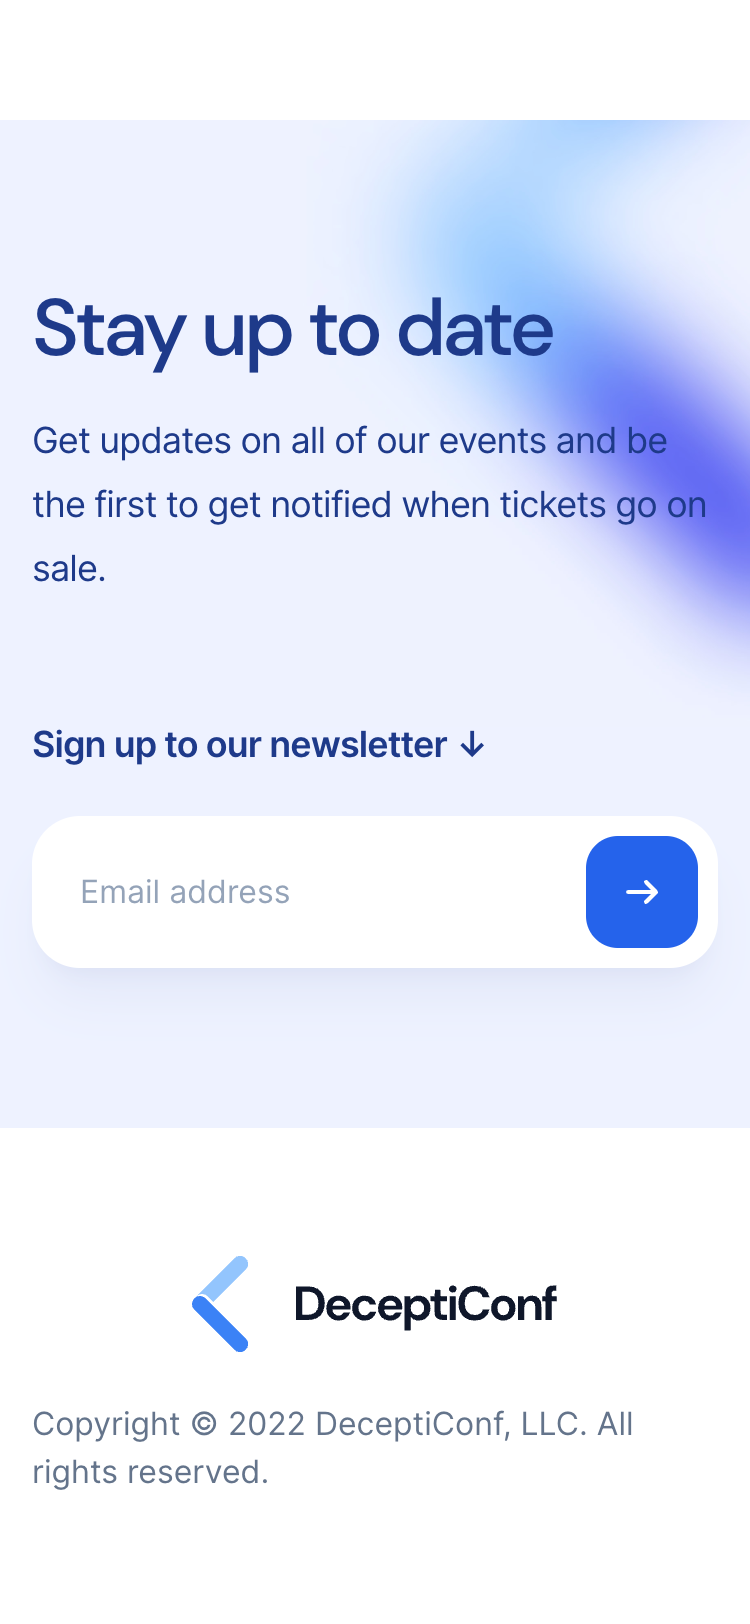 Mobile screenshot of the Keynote Tailwind UI template footer. The footer contains a newsletter sign up form with an introduction paragraph and email address input field. Below that is the DeceptiConf logo and copyright notice.